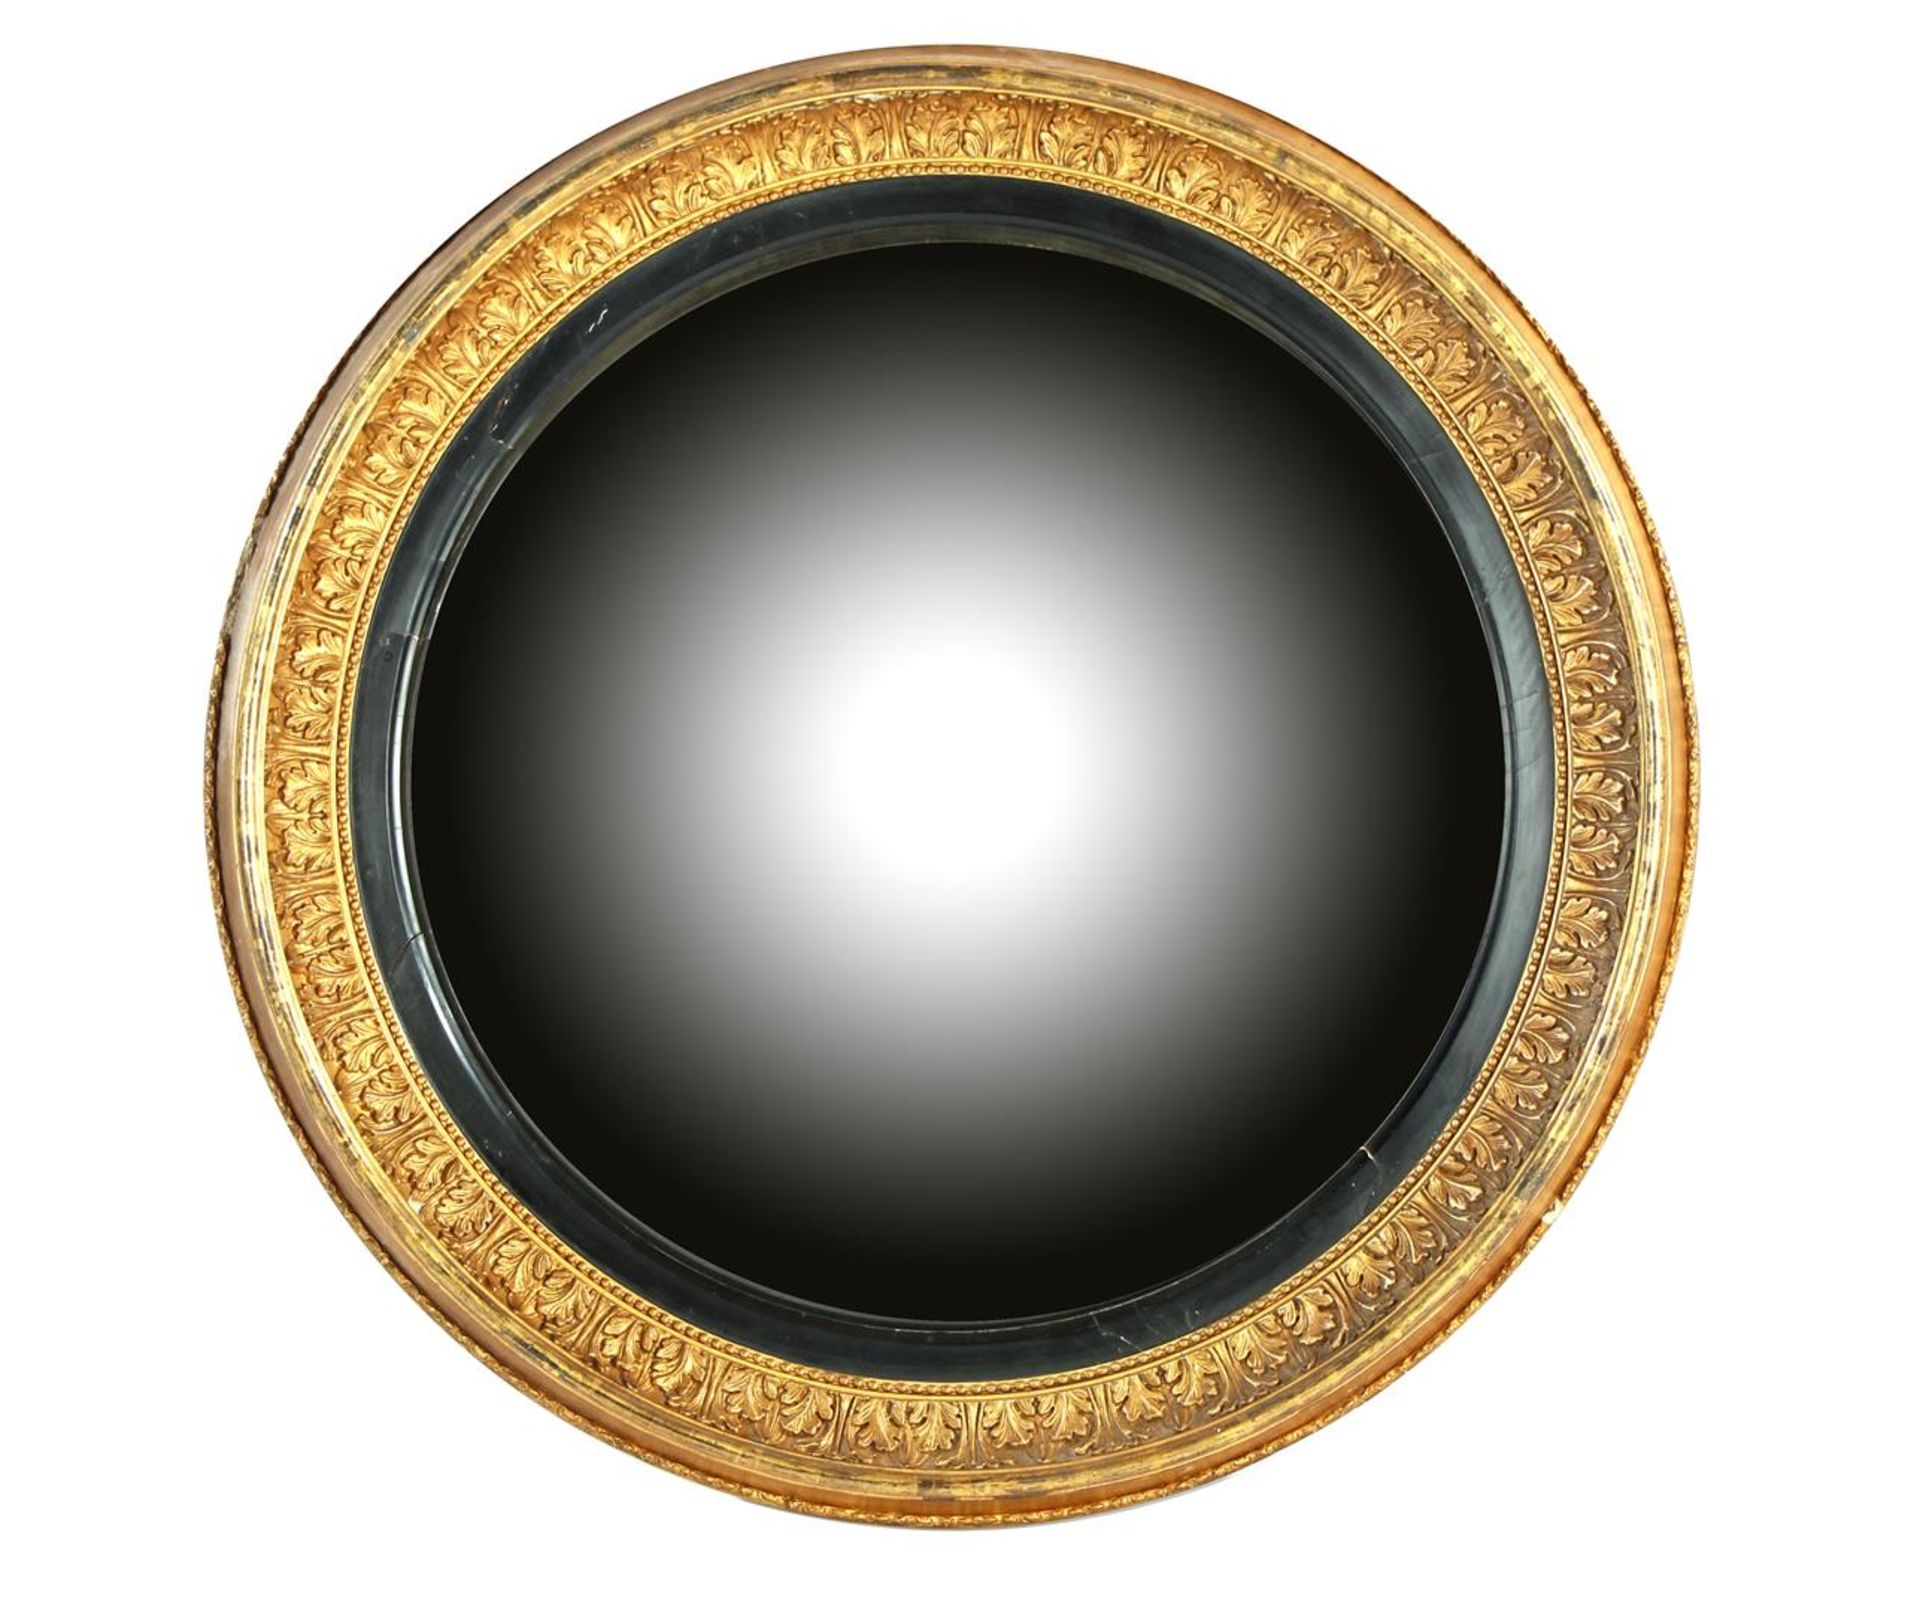 Round butler mirror in richly decorated gold-coloured frame